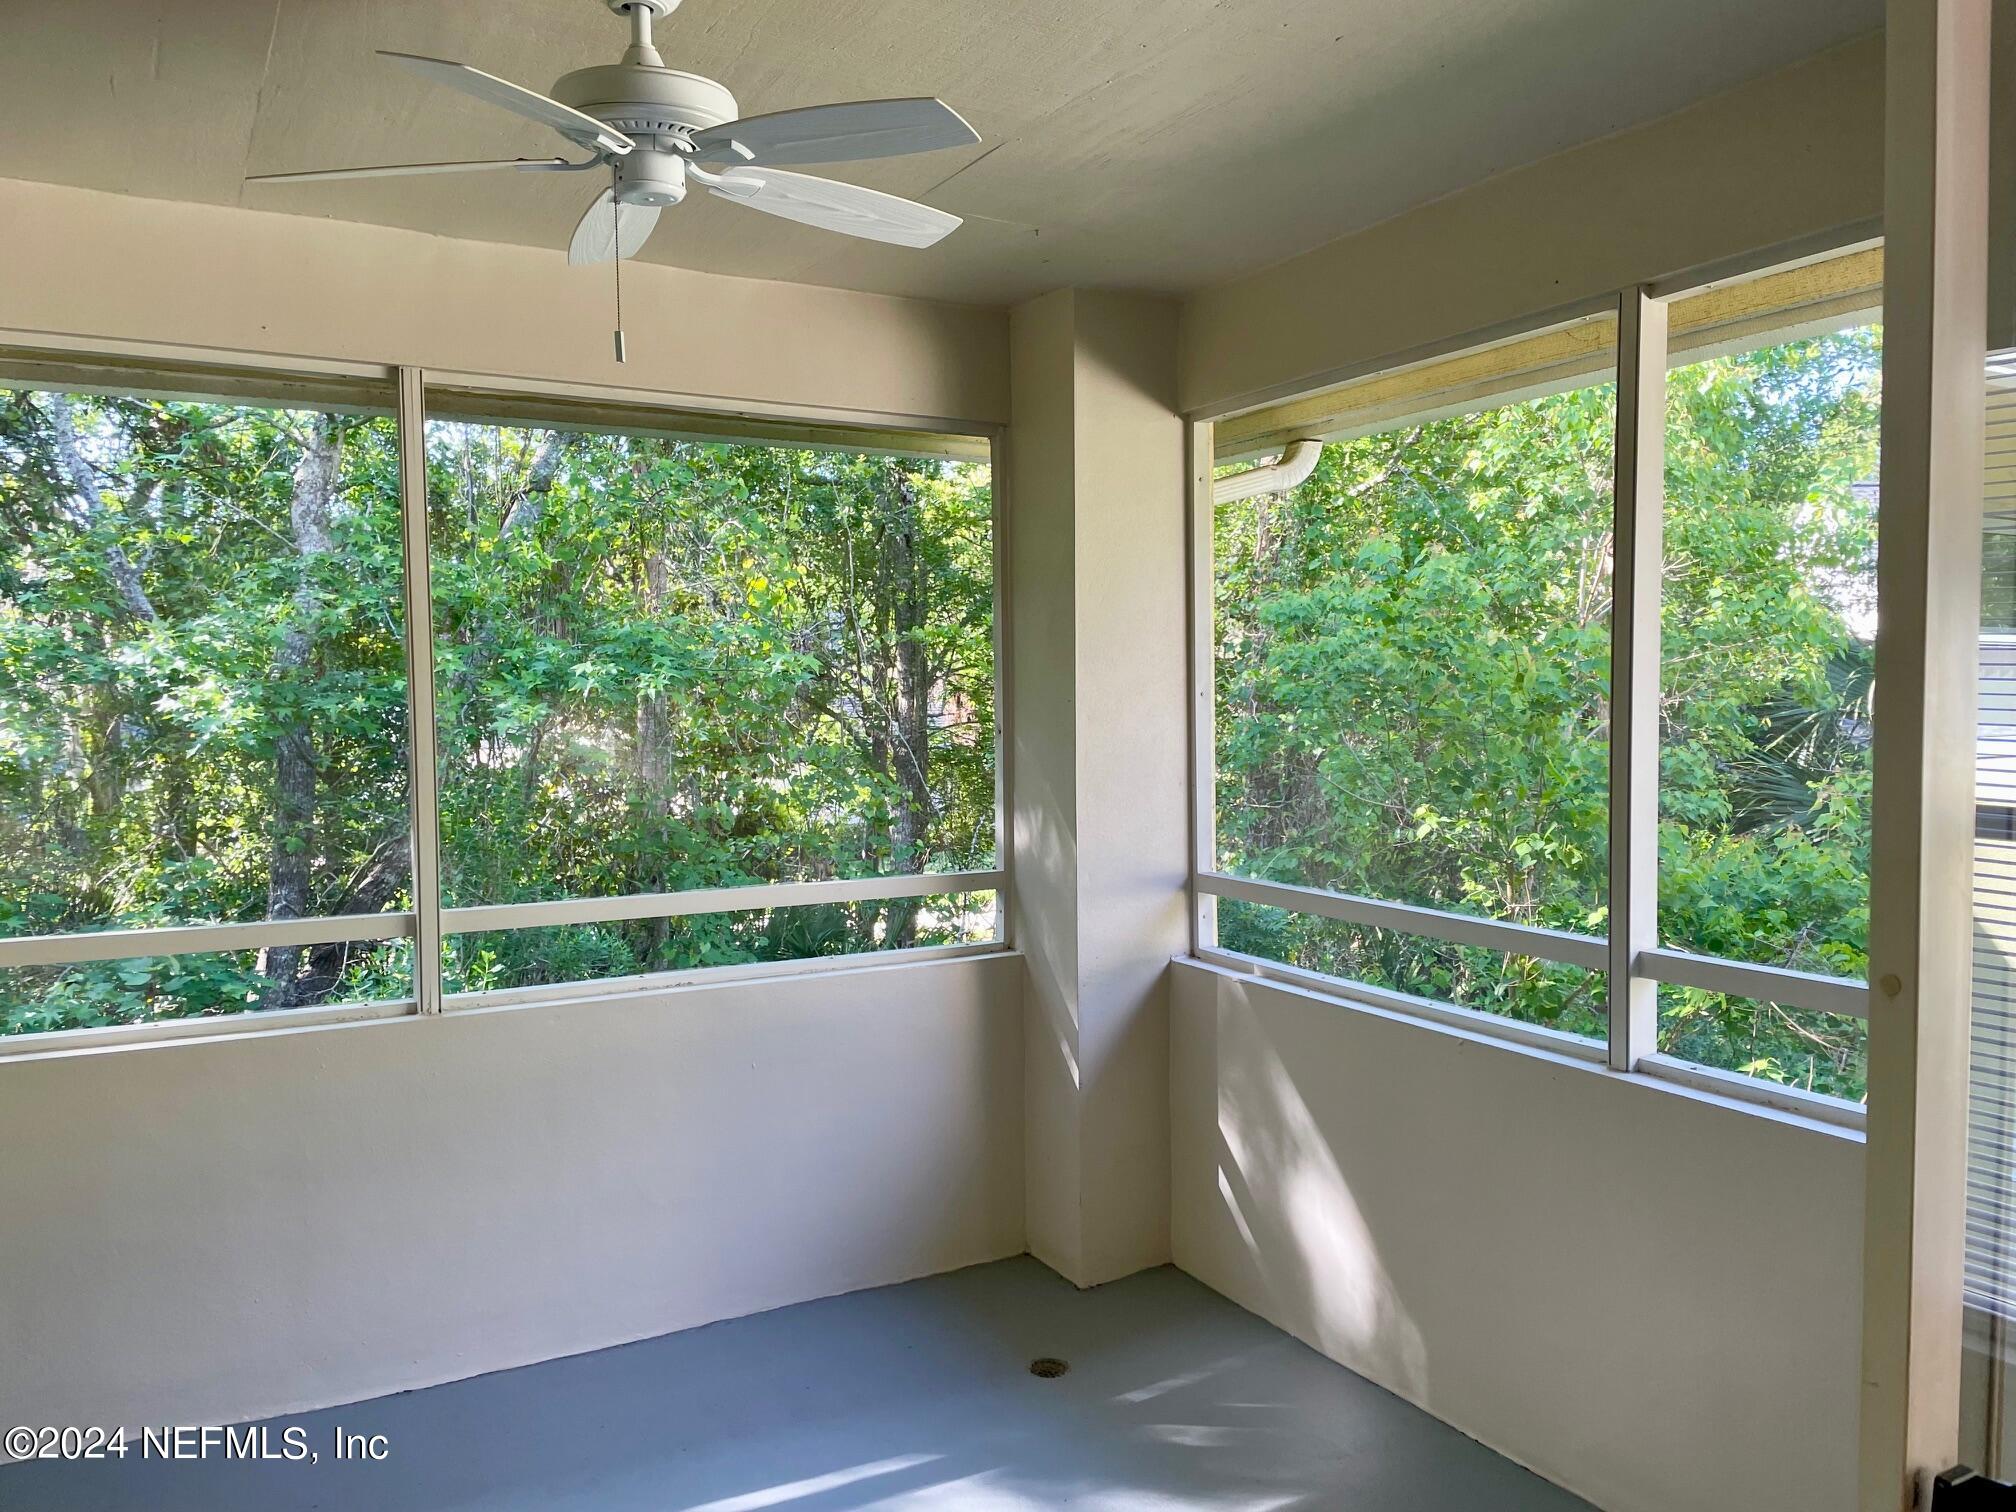 Jacksonville Beach, FL home for sale located at 1800 The Greens Way Unit 506, Jacksonville Beach, FL 32250